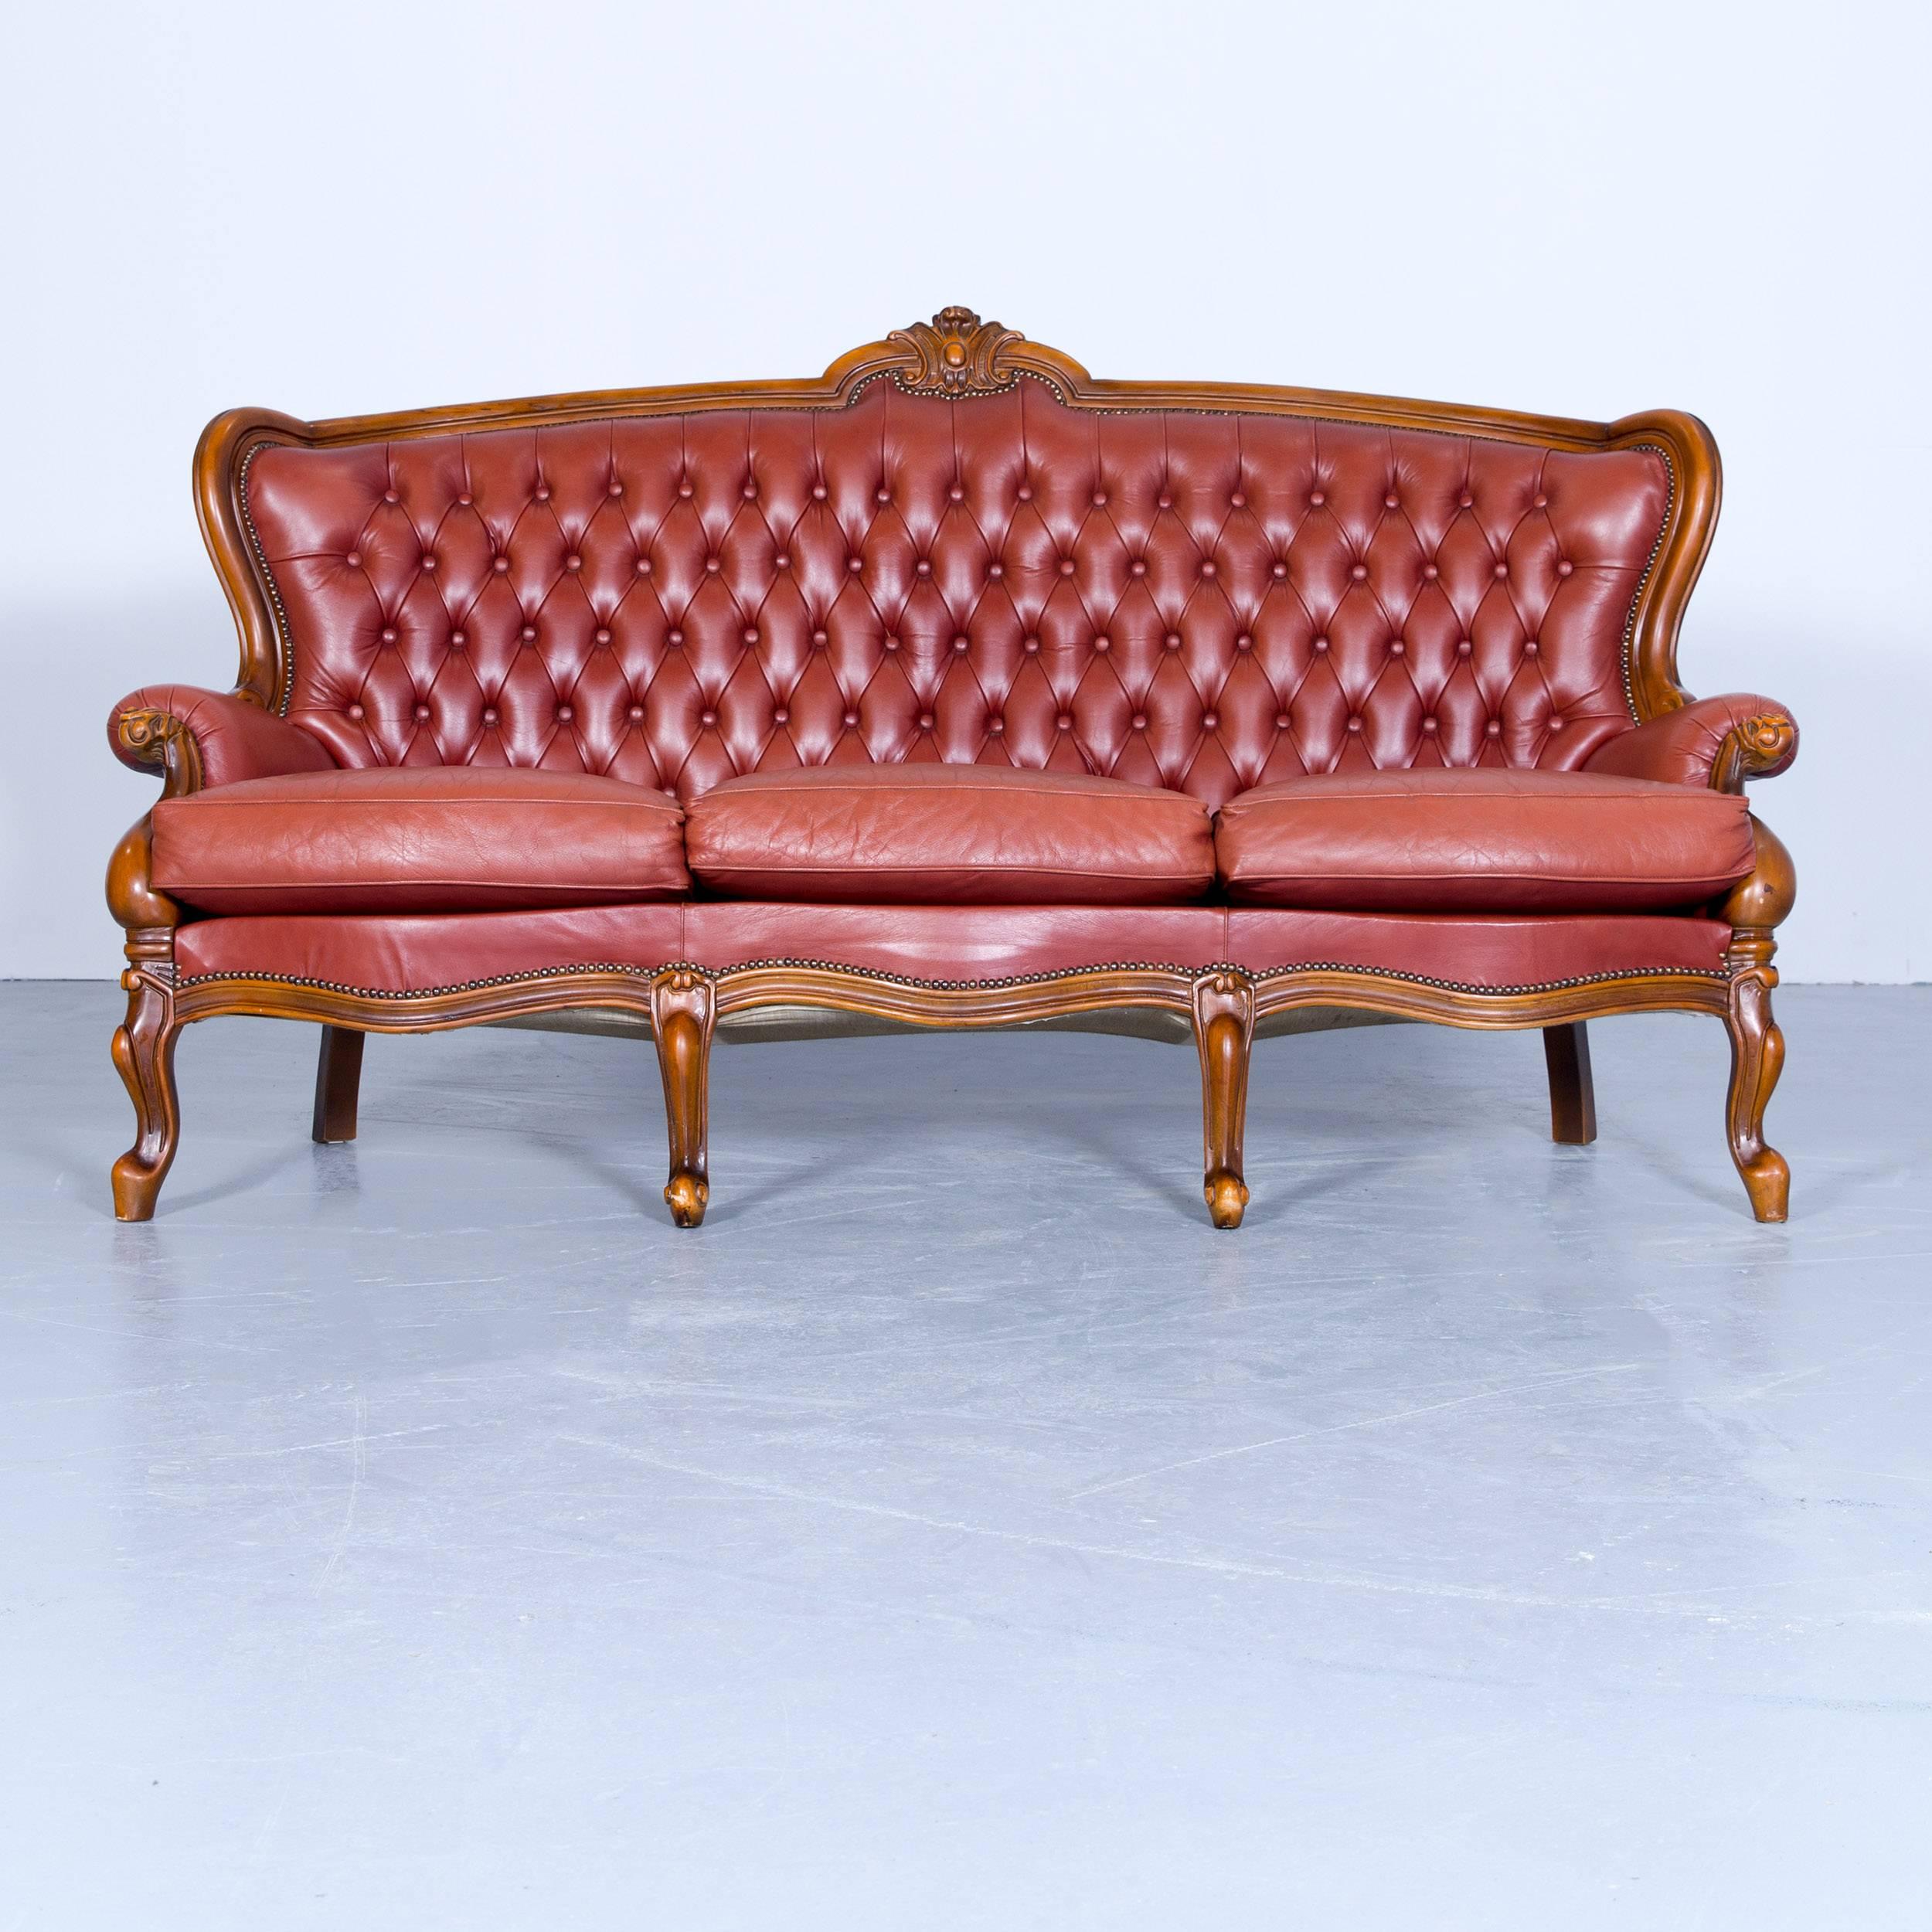 Barock chesterfield sofa red brown orange leather three-seat couch vintage retro rivets, made for pure comfort.